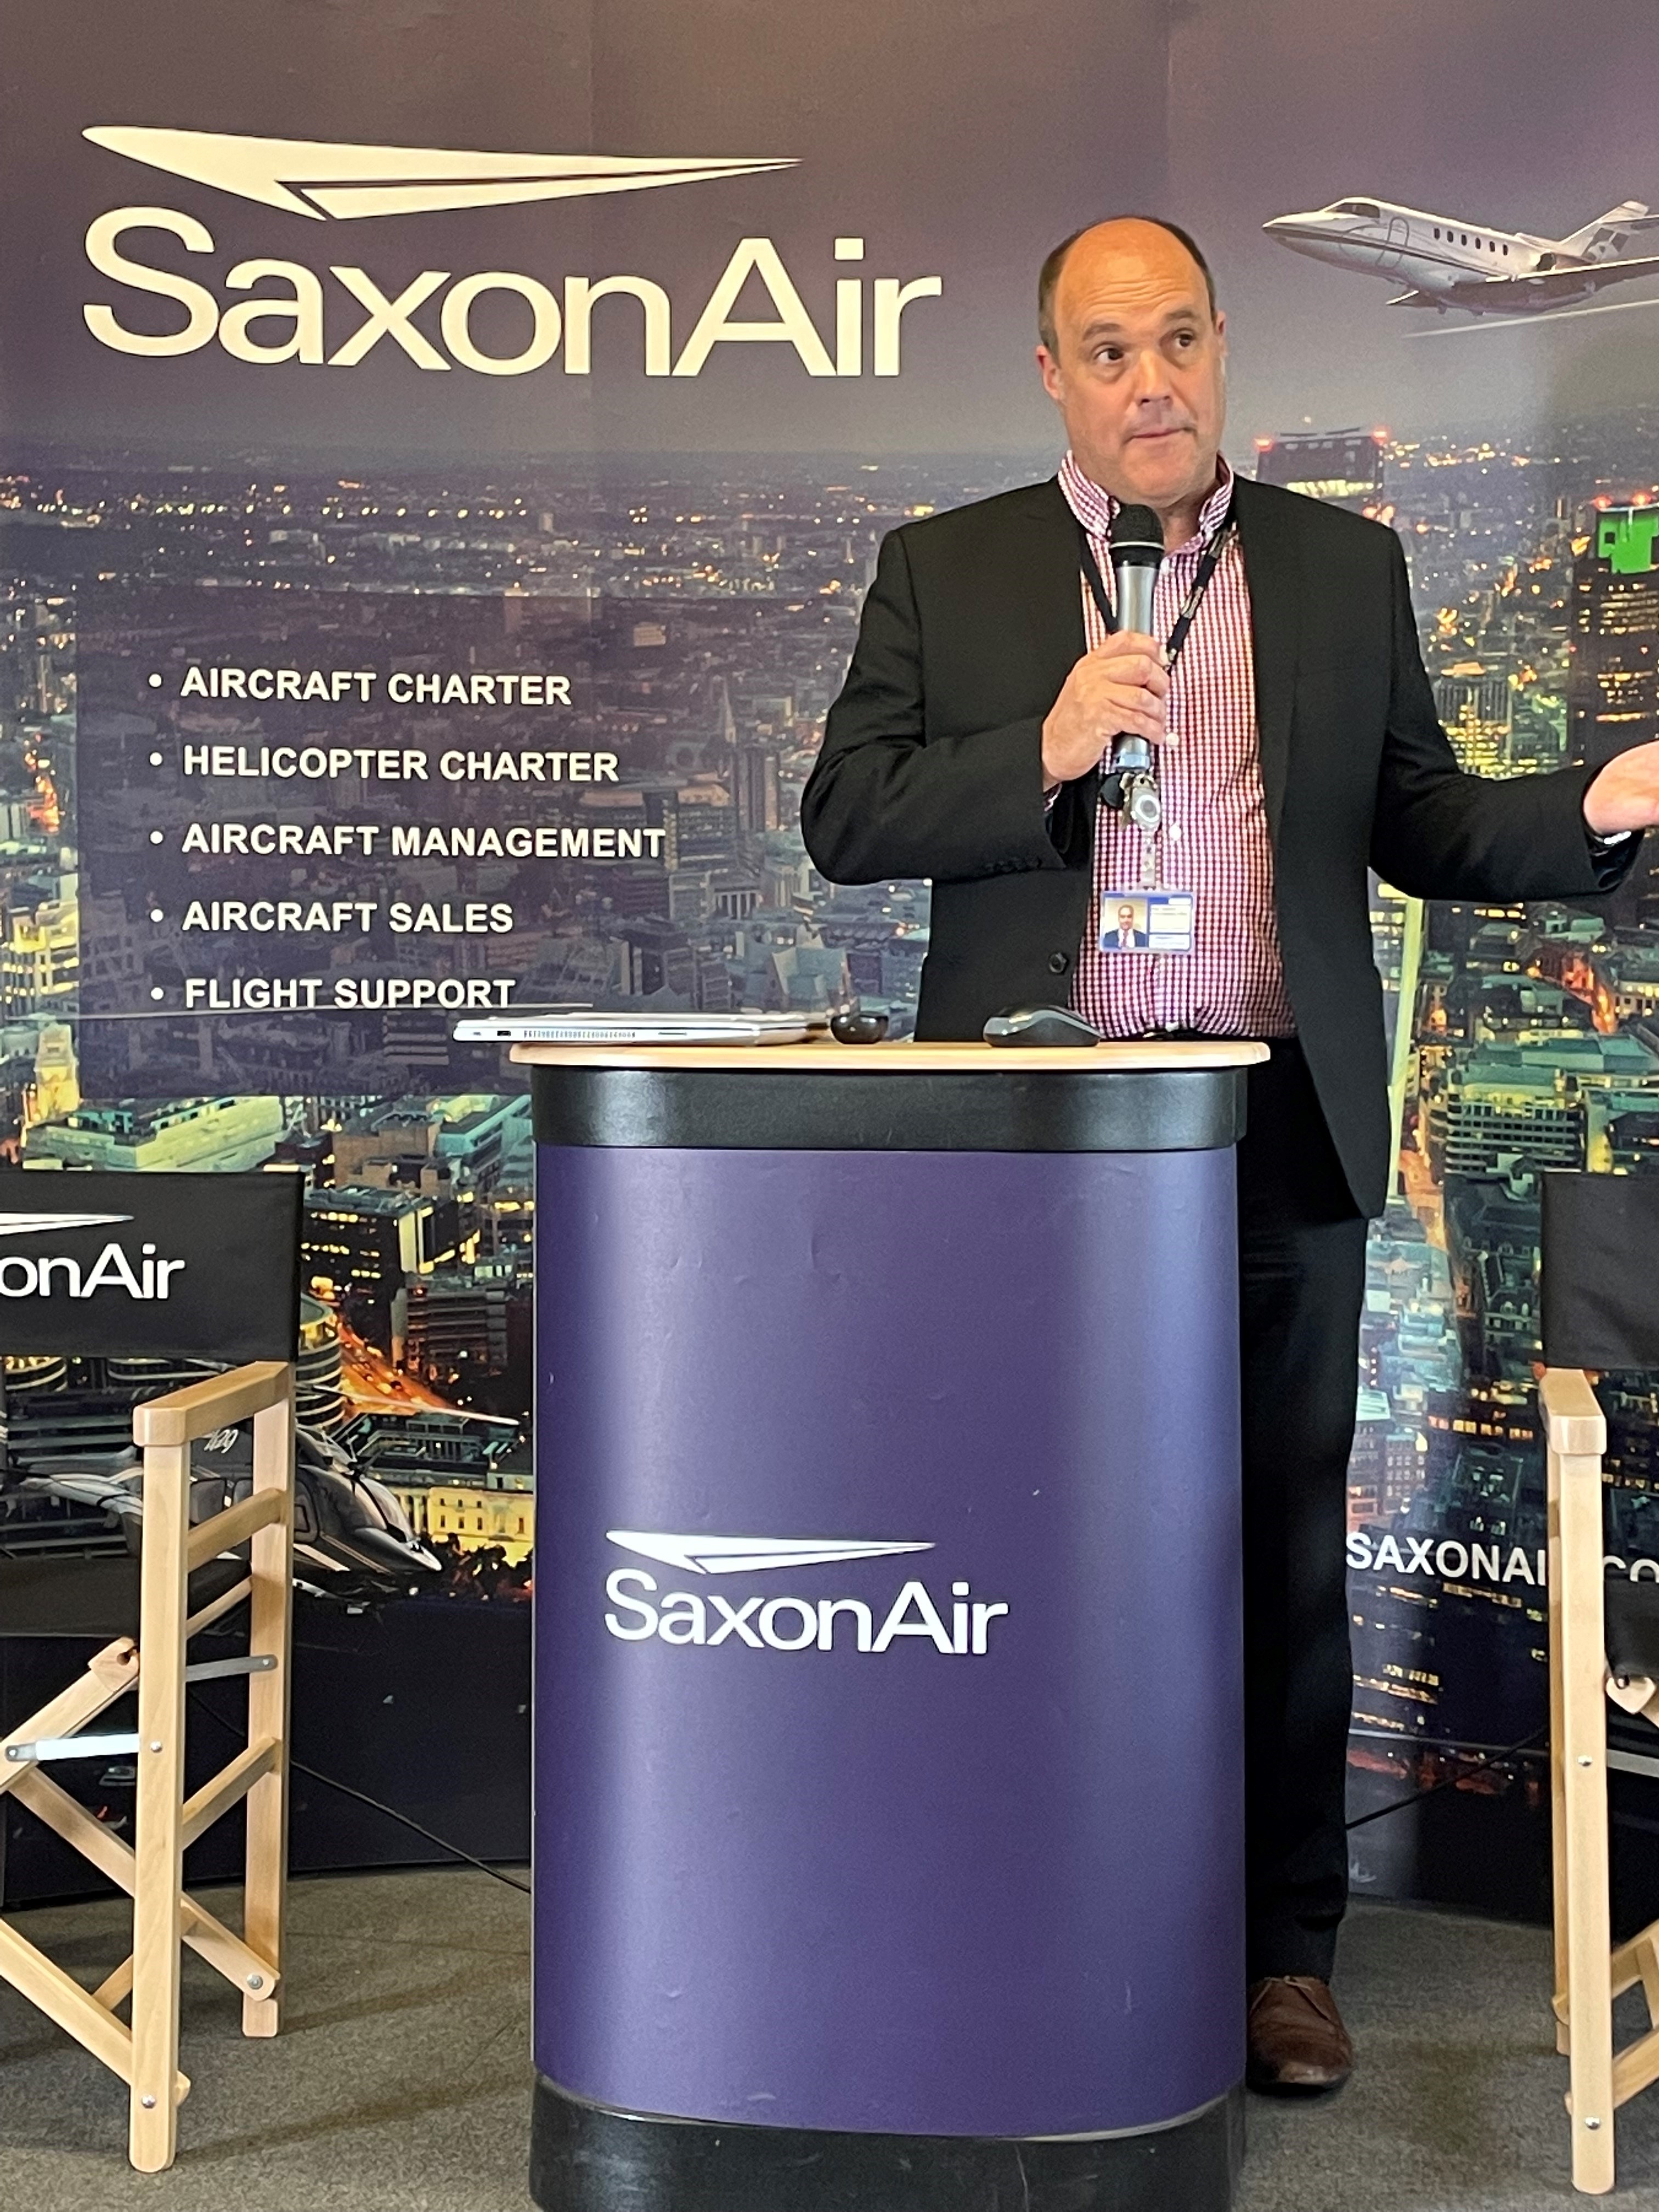 SaxonAir hosts a wild weekend at Norwich Airport